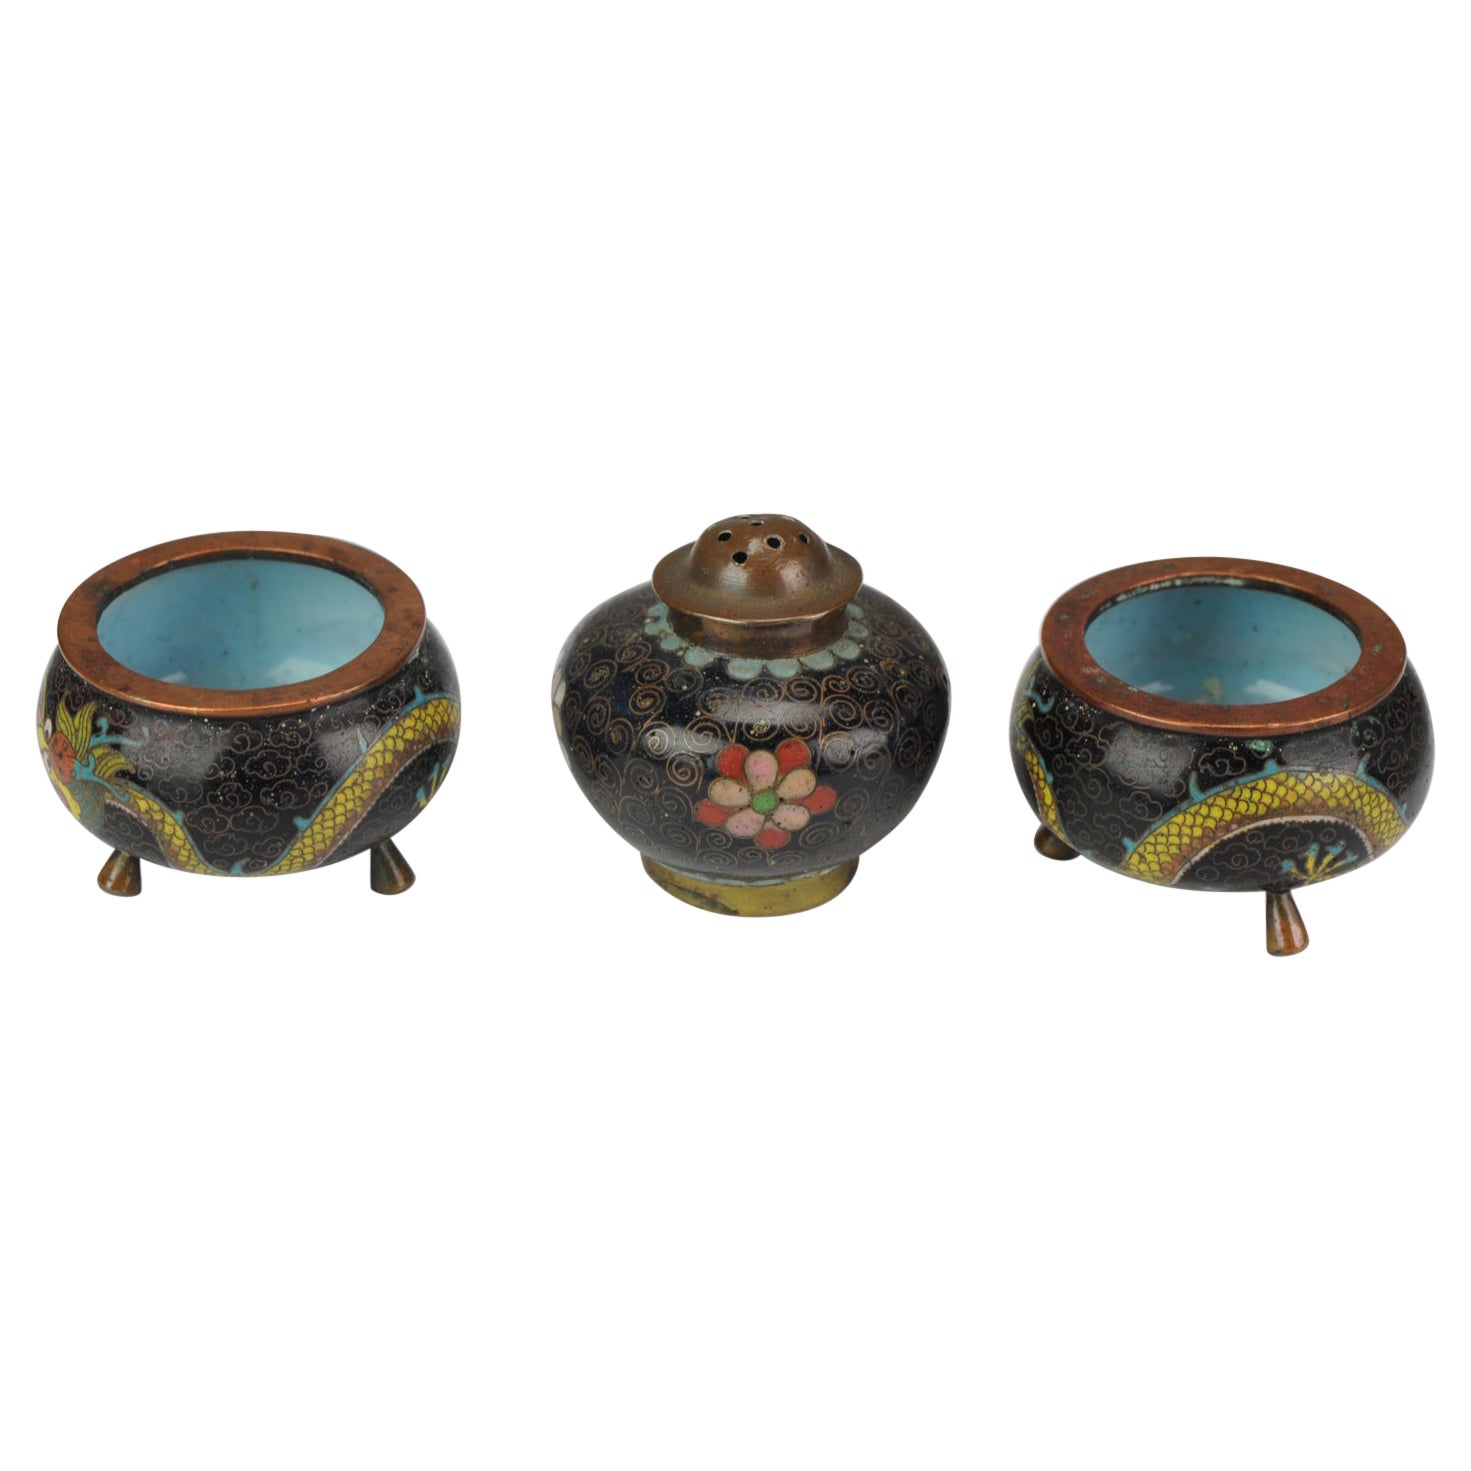 Top Antique Bronze Cloisonné Salt Cellar Tripods China, 19th or Early 20th Cen